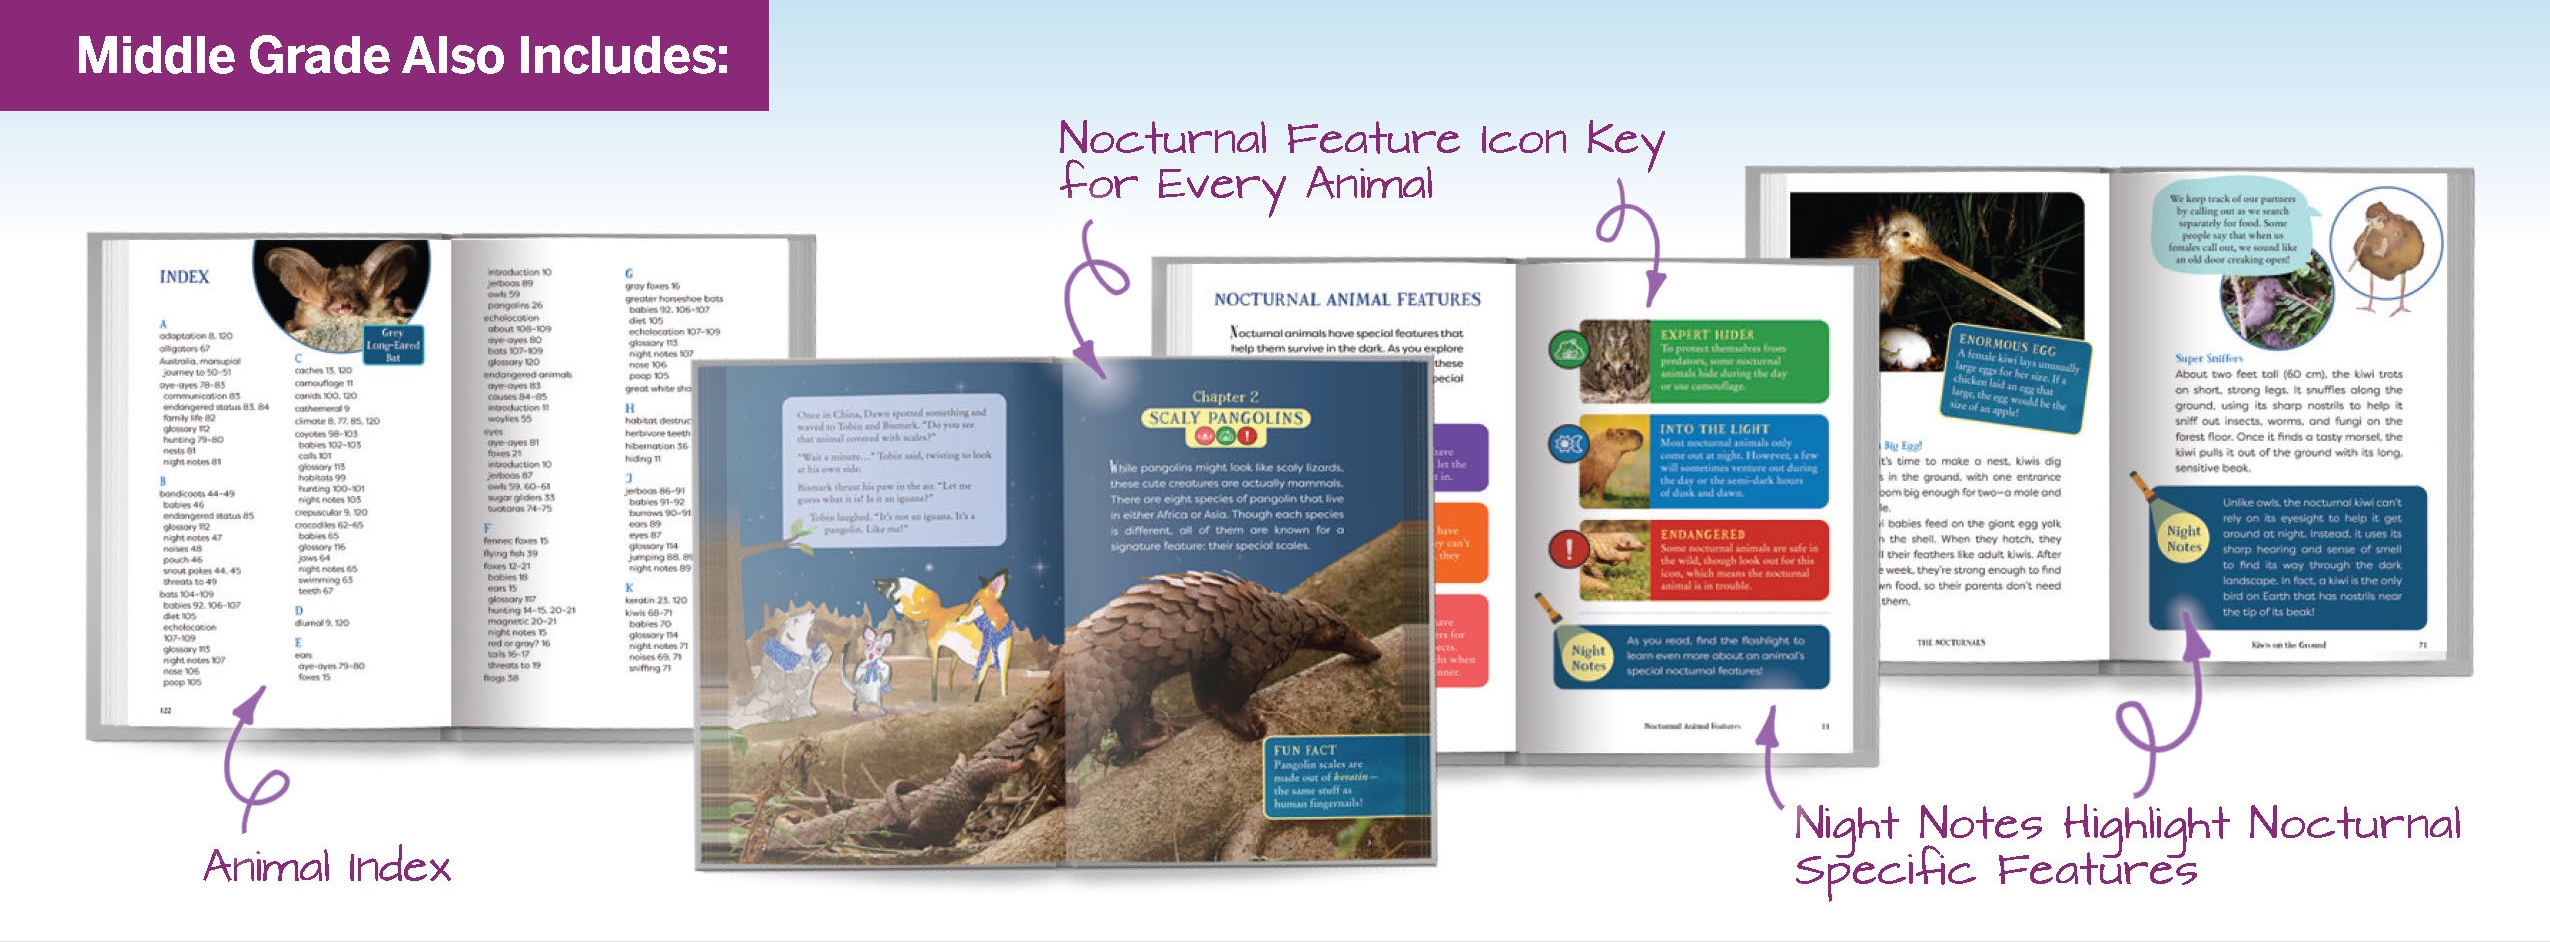 Using arrows to point to certain pages of the book, this graphic shows features of what the middle grade book has such as an animal index, a nocturnal feature icon key for every animal, and night notes. 